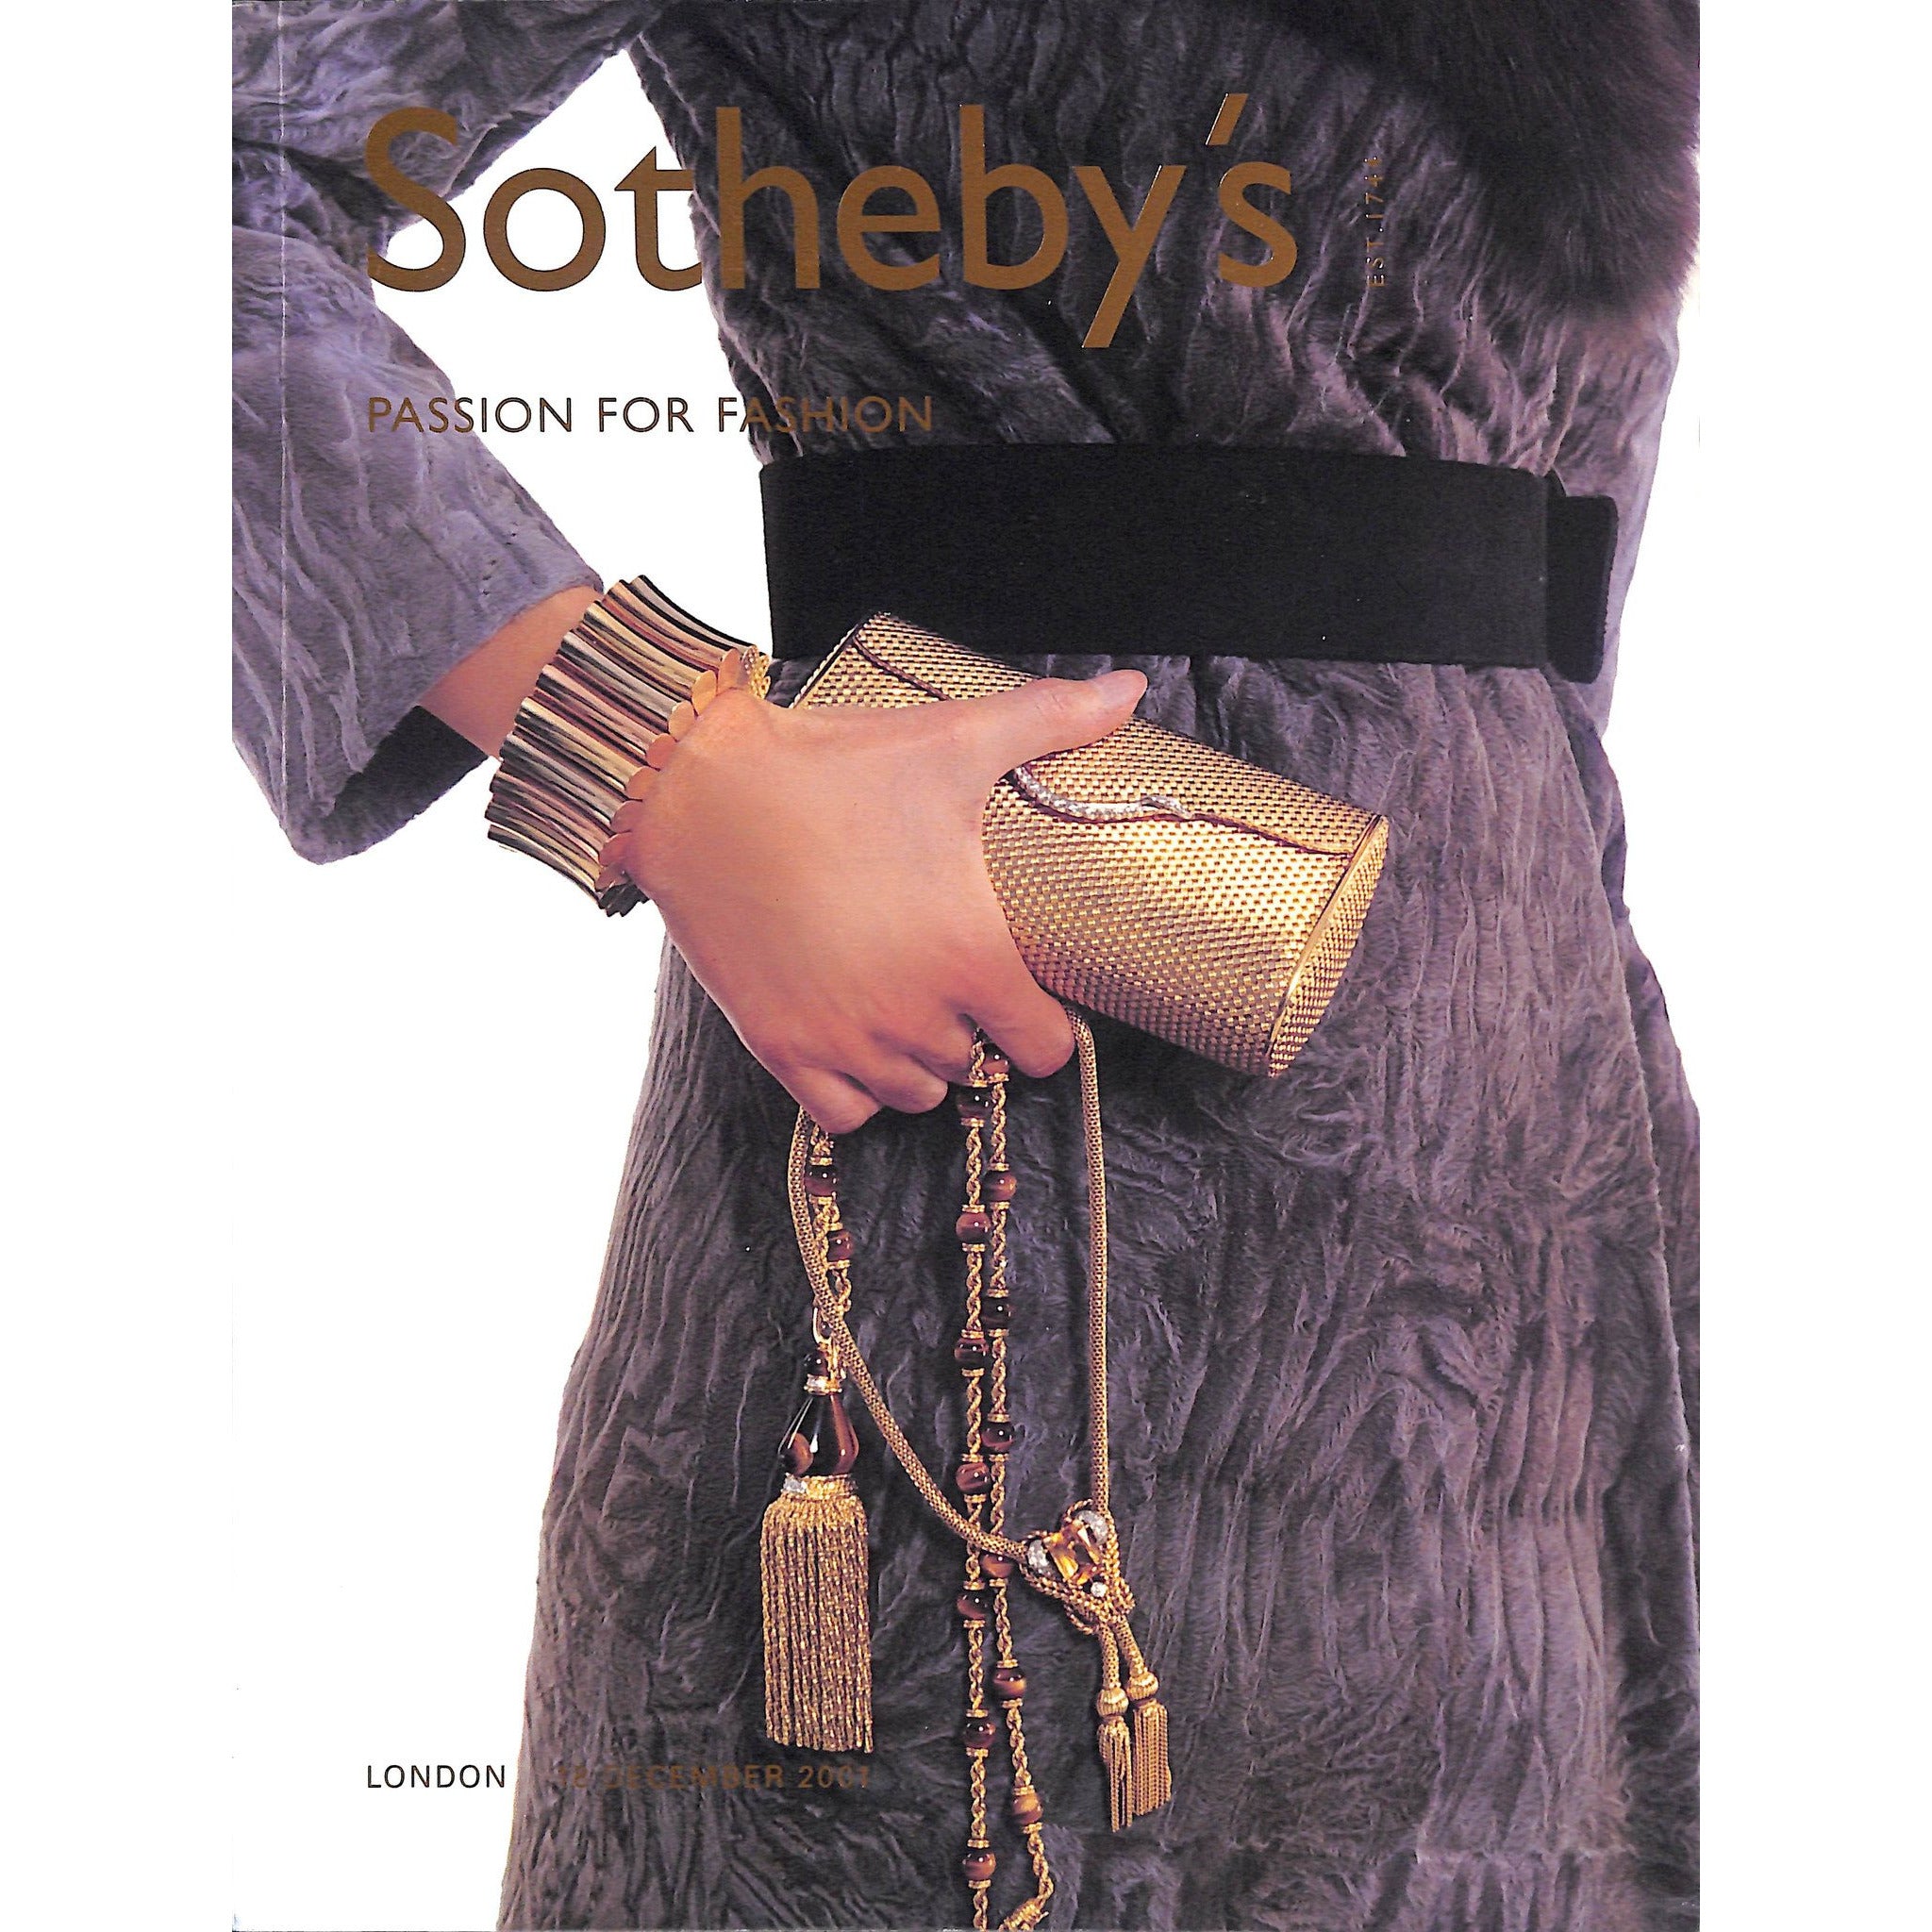 Fashion Sotheby's